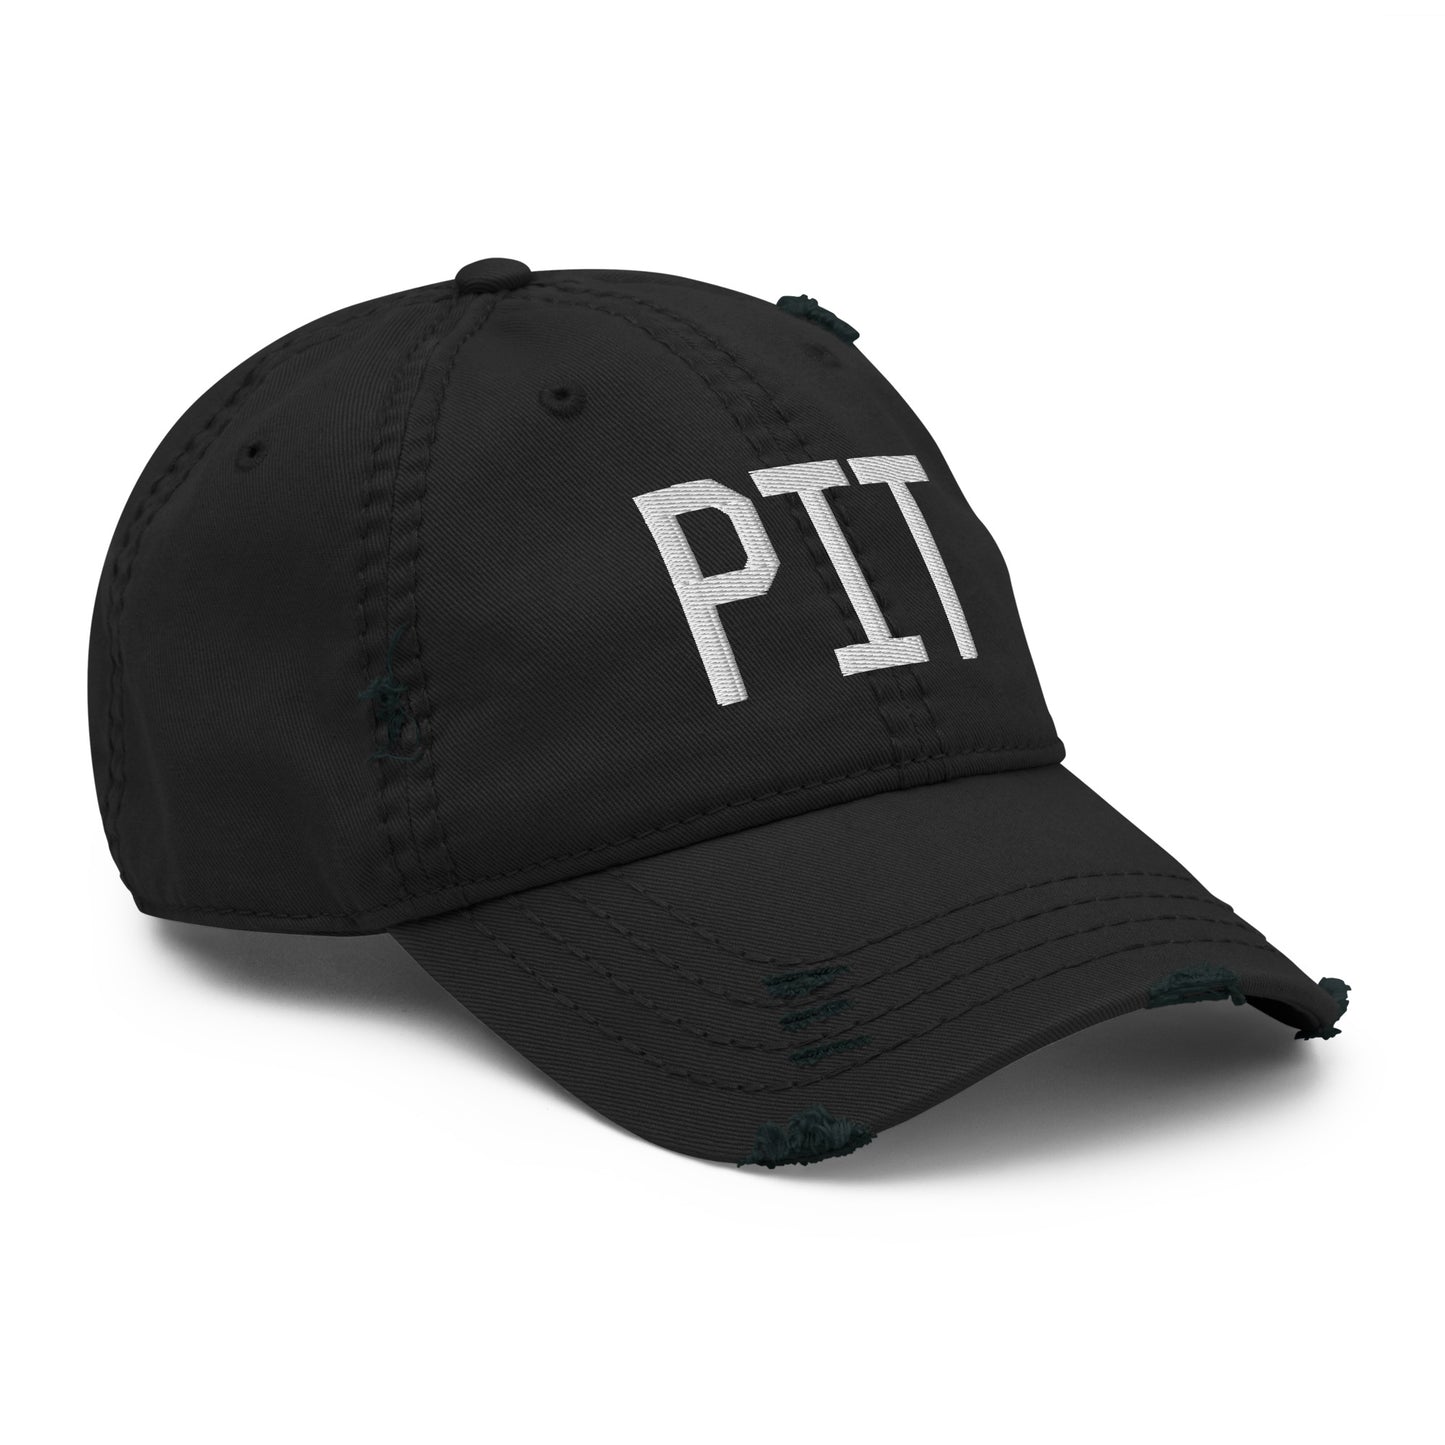 Airport Code Distressed Hat - White • PIT Pittsburgh • YHM Designs - Image 12